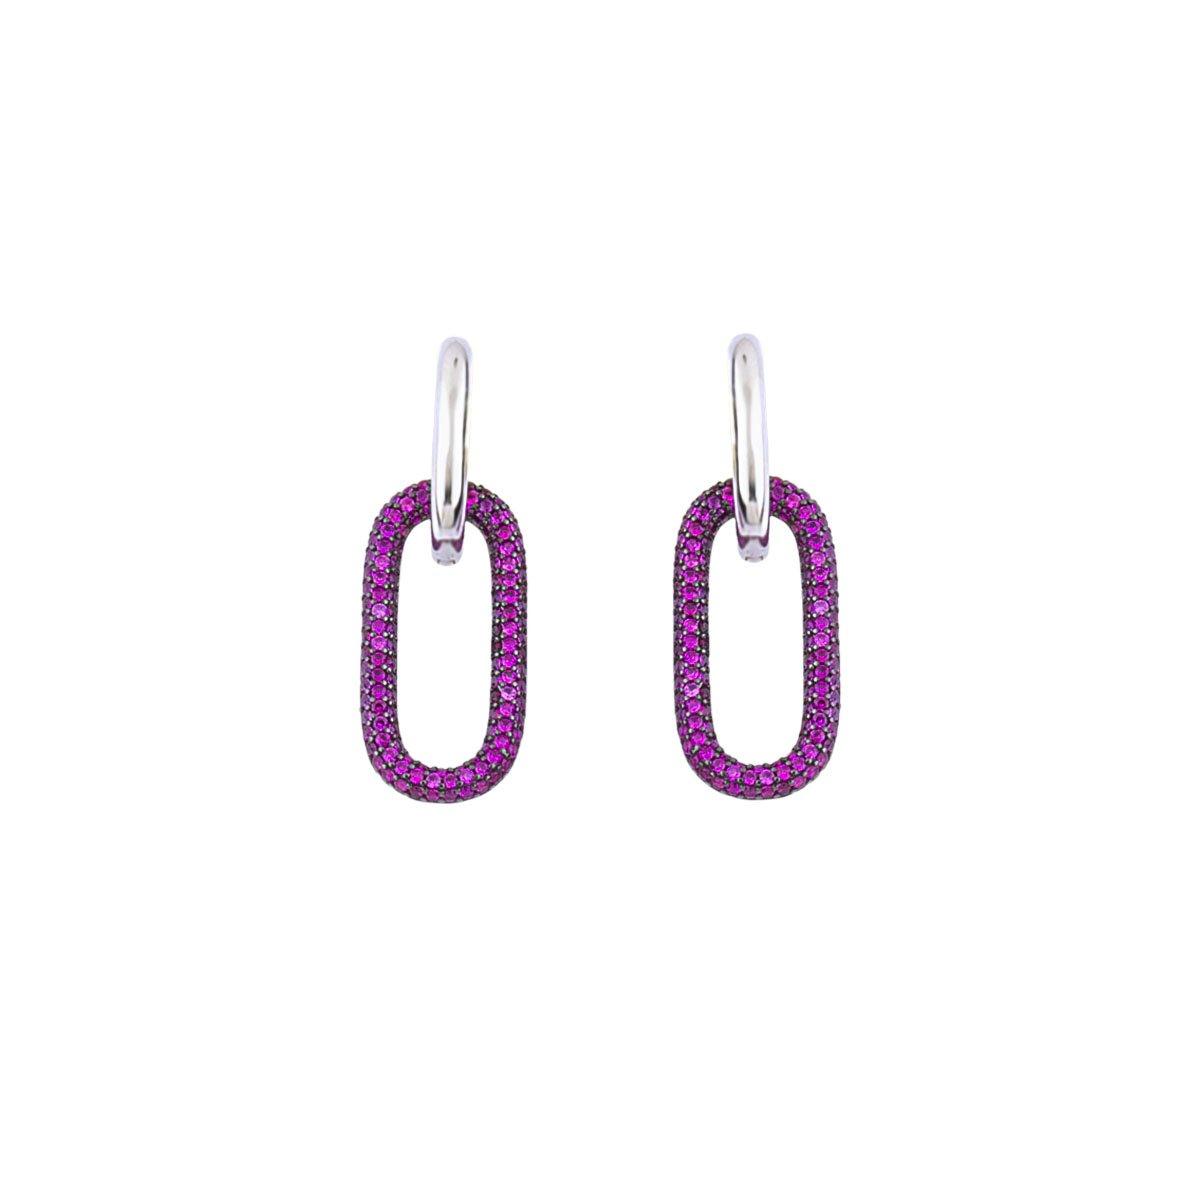 Earring E1405-S - 925 Sterling Silver - Asfour Crystal